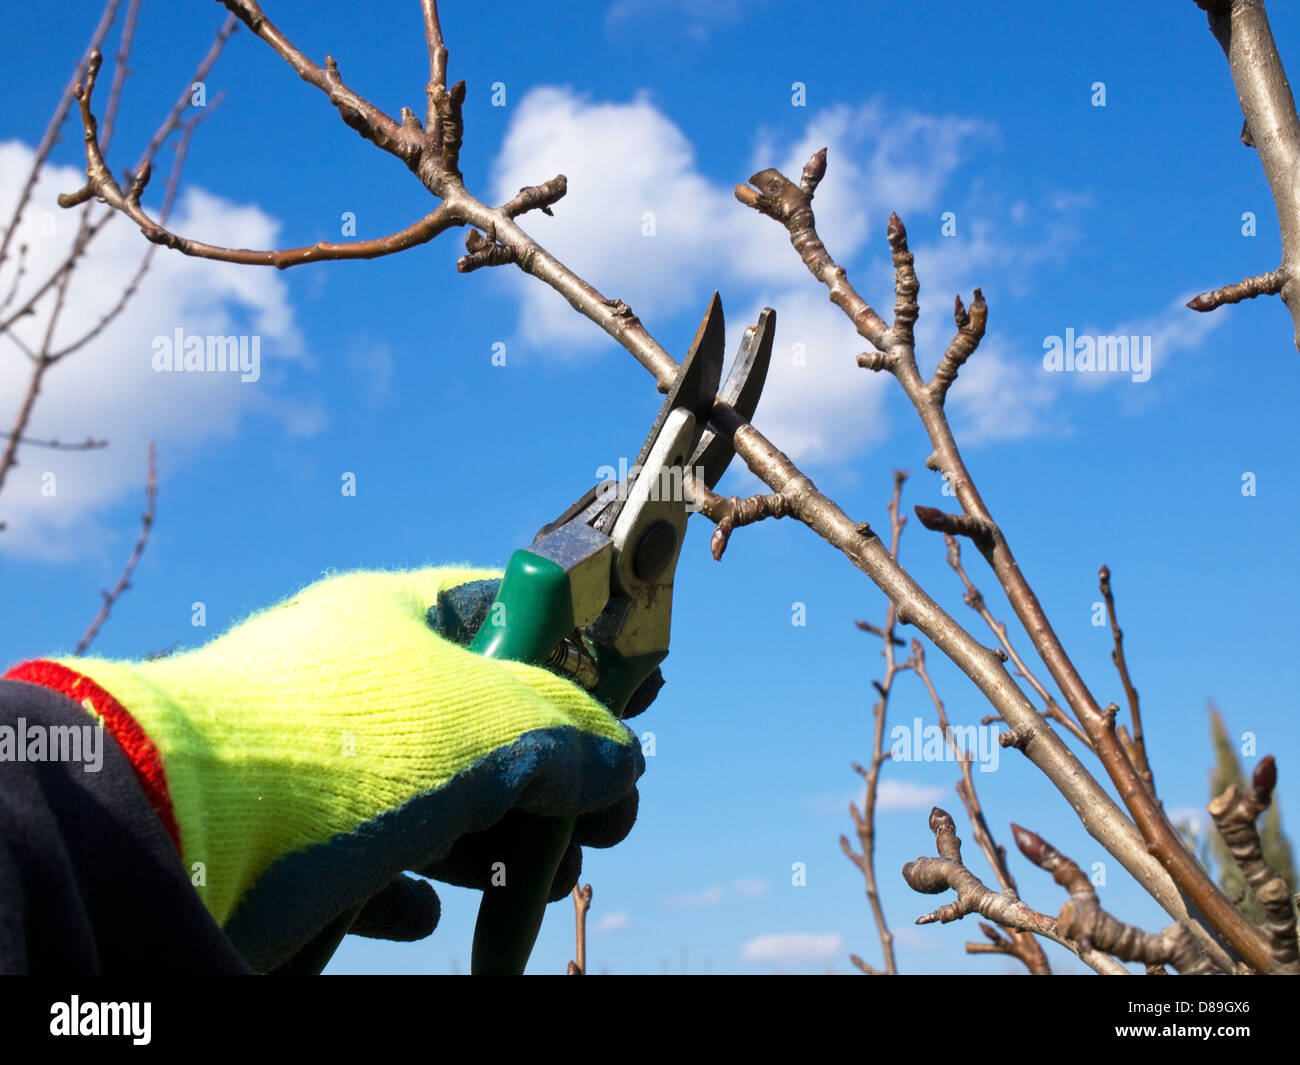 hand with a glowe pruning with a scissors Stock Photo